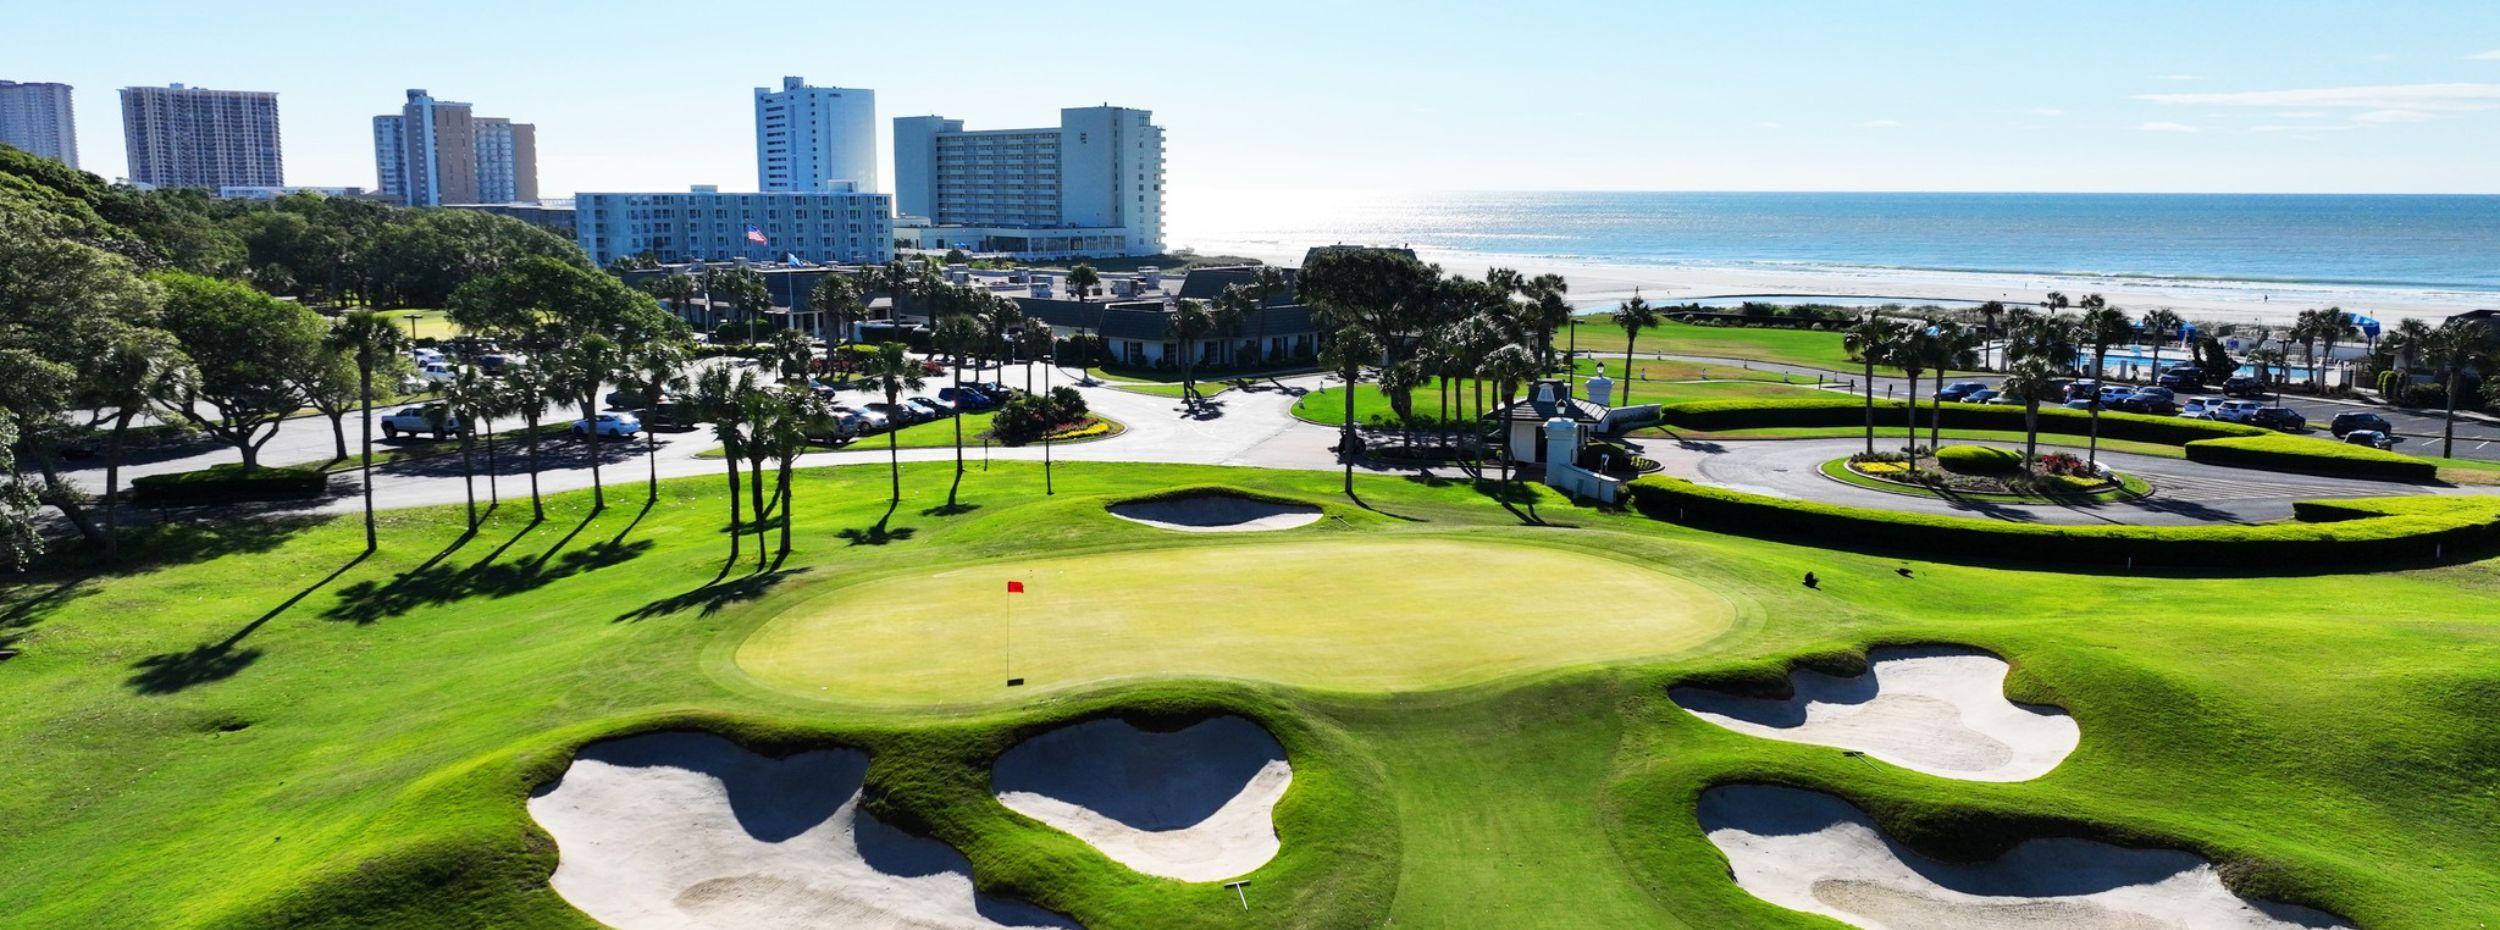 The Myrtle Beach Classic Golf Tournament: What You Need to Know